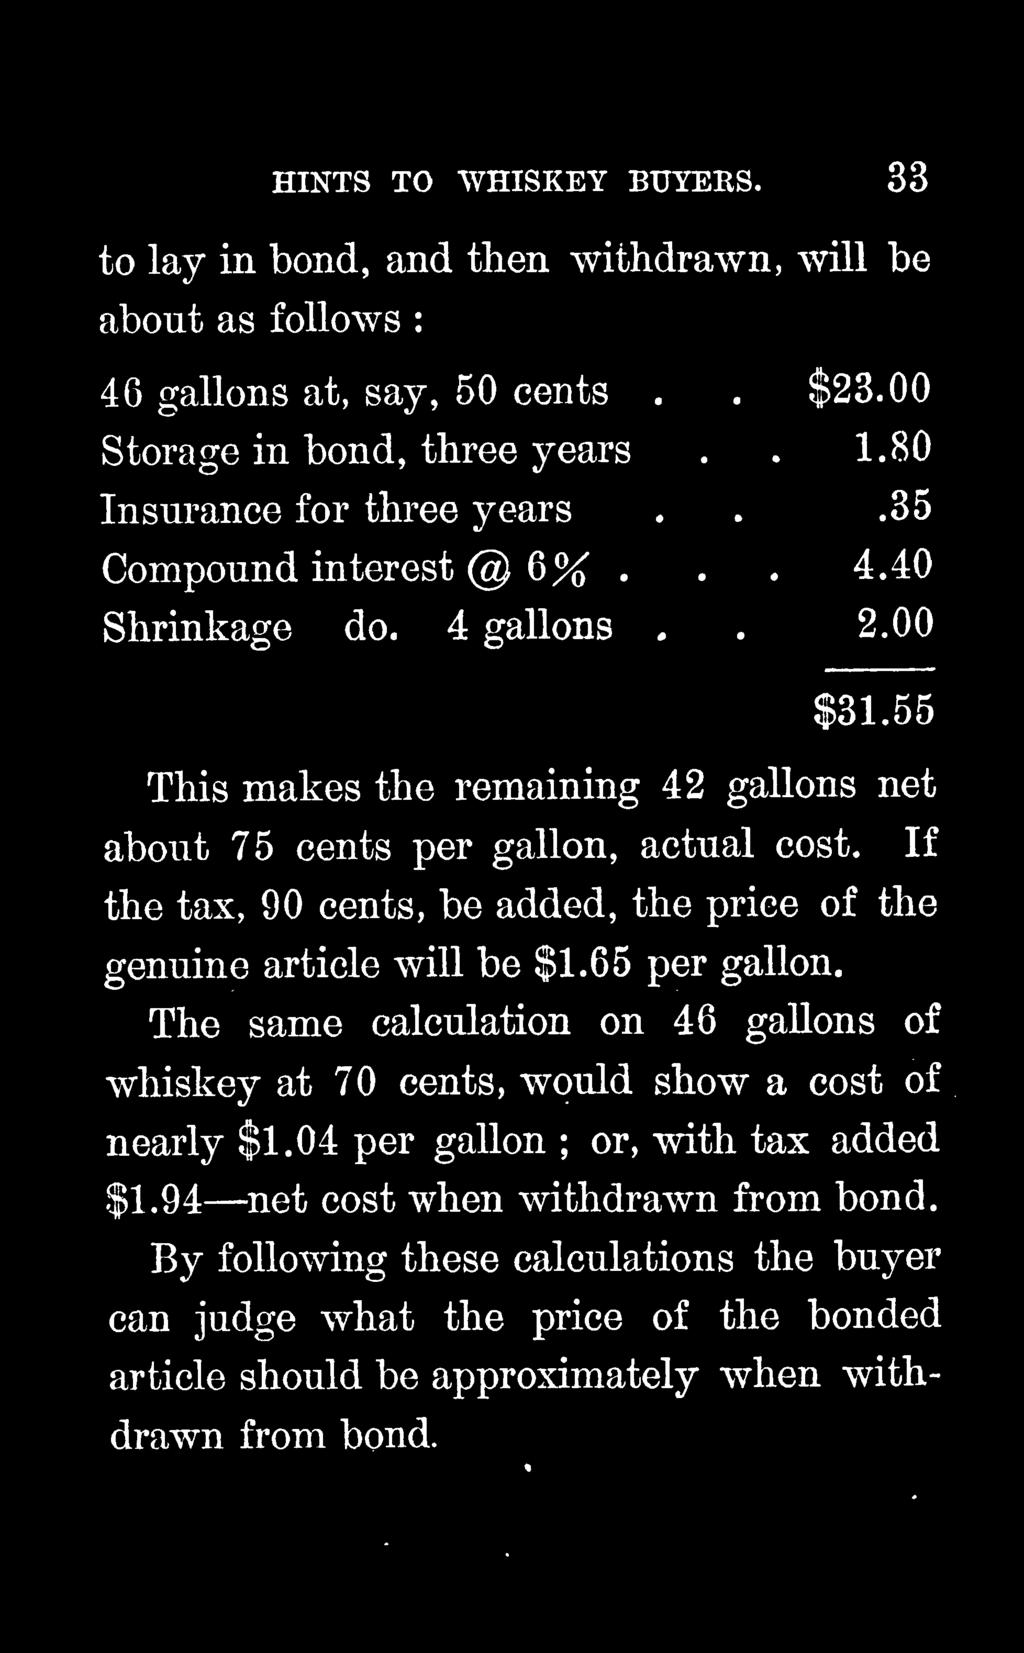 The same calculation on 46 gallons of whiskey at 70 cents, would show a cost of nearly $1.